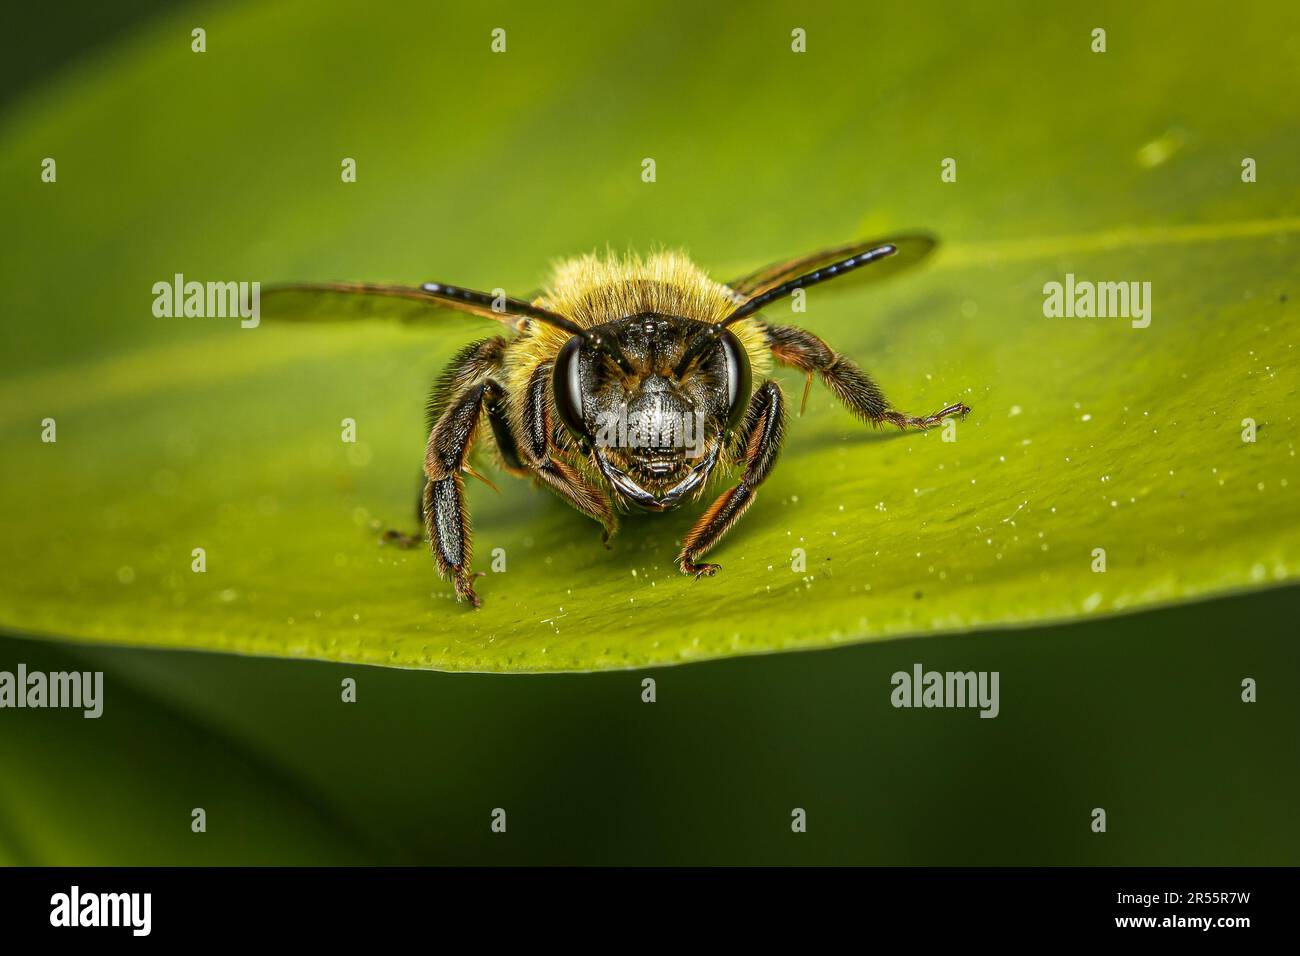 Detailed front view of a honey bee at rest on a green leaf. Stock Photo